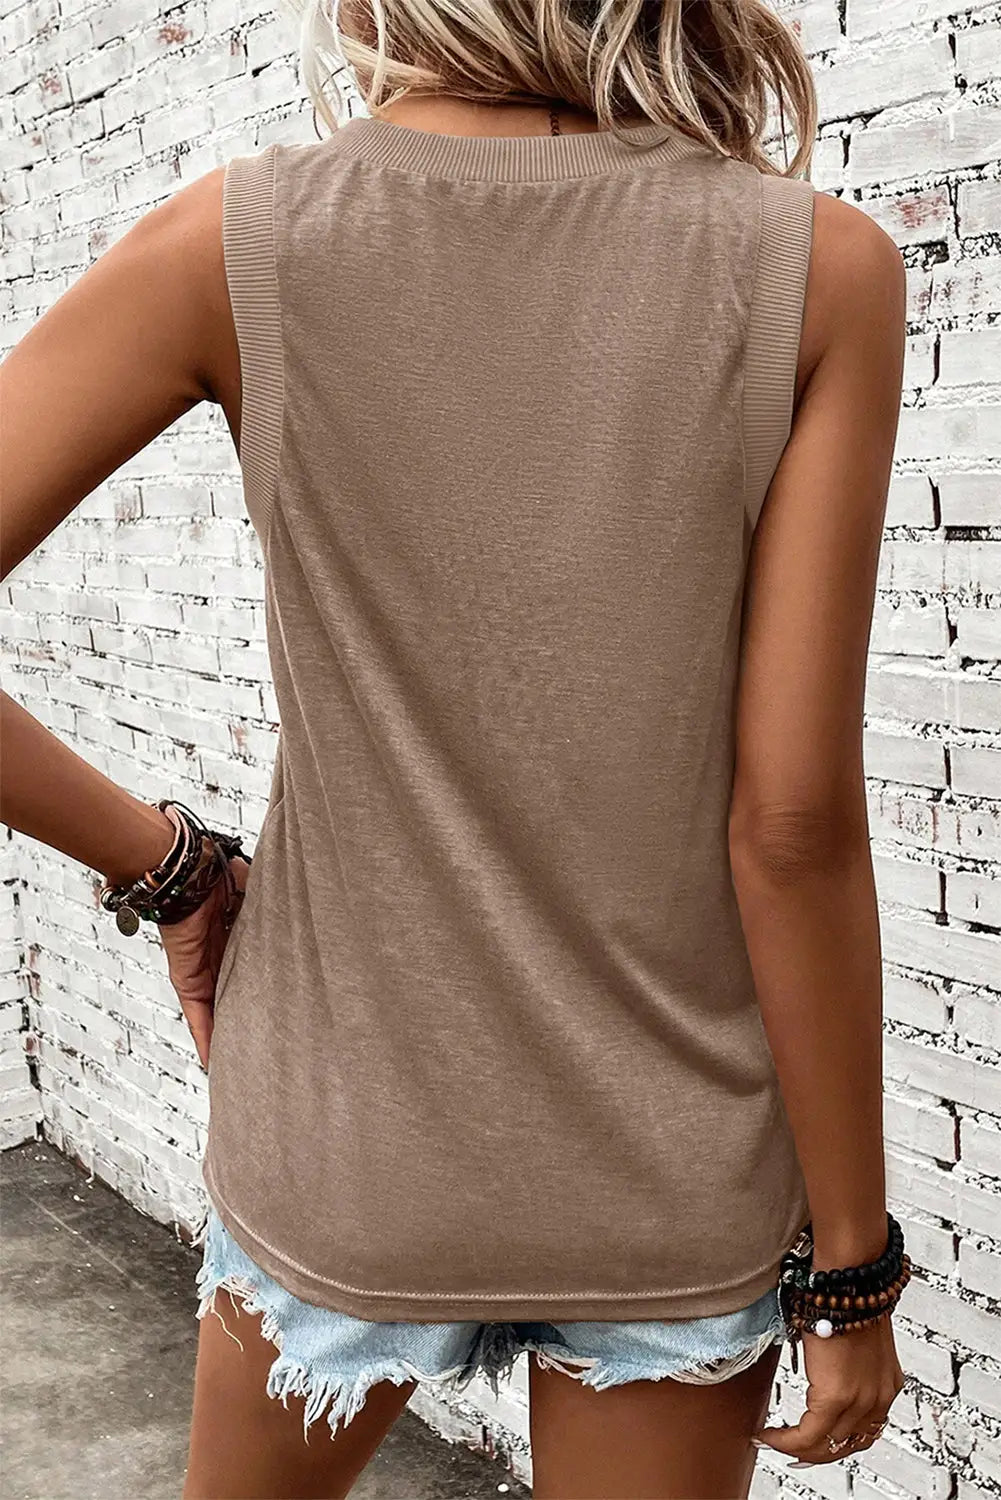 Simply taupe ribbed v neck tank top - tops